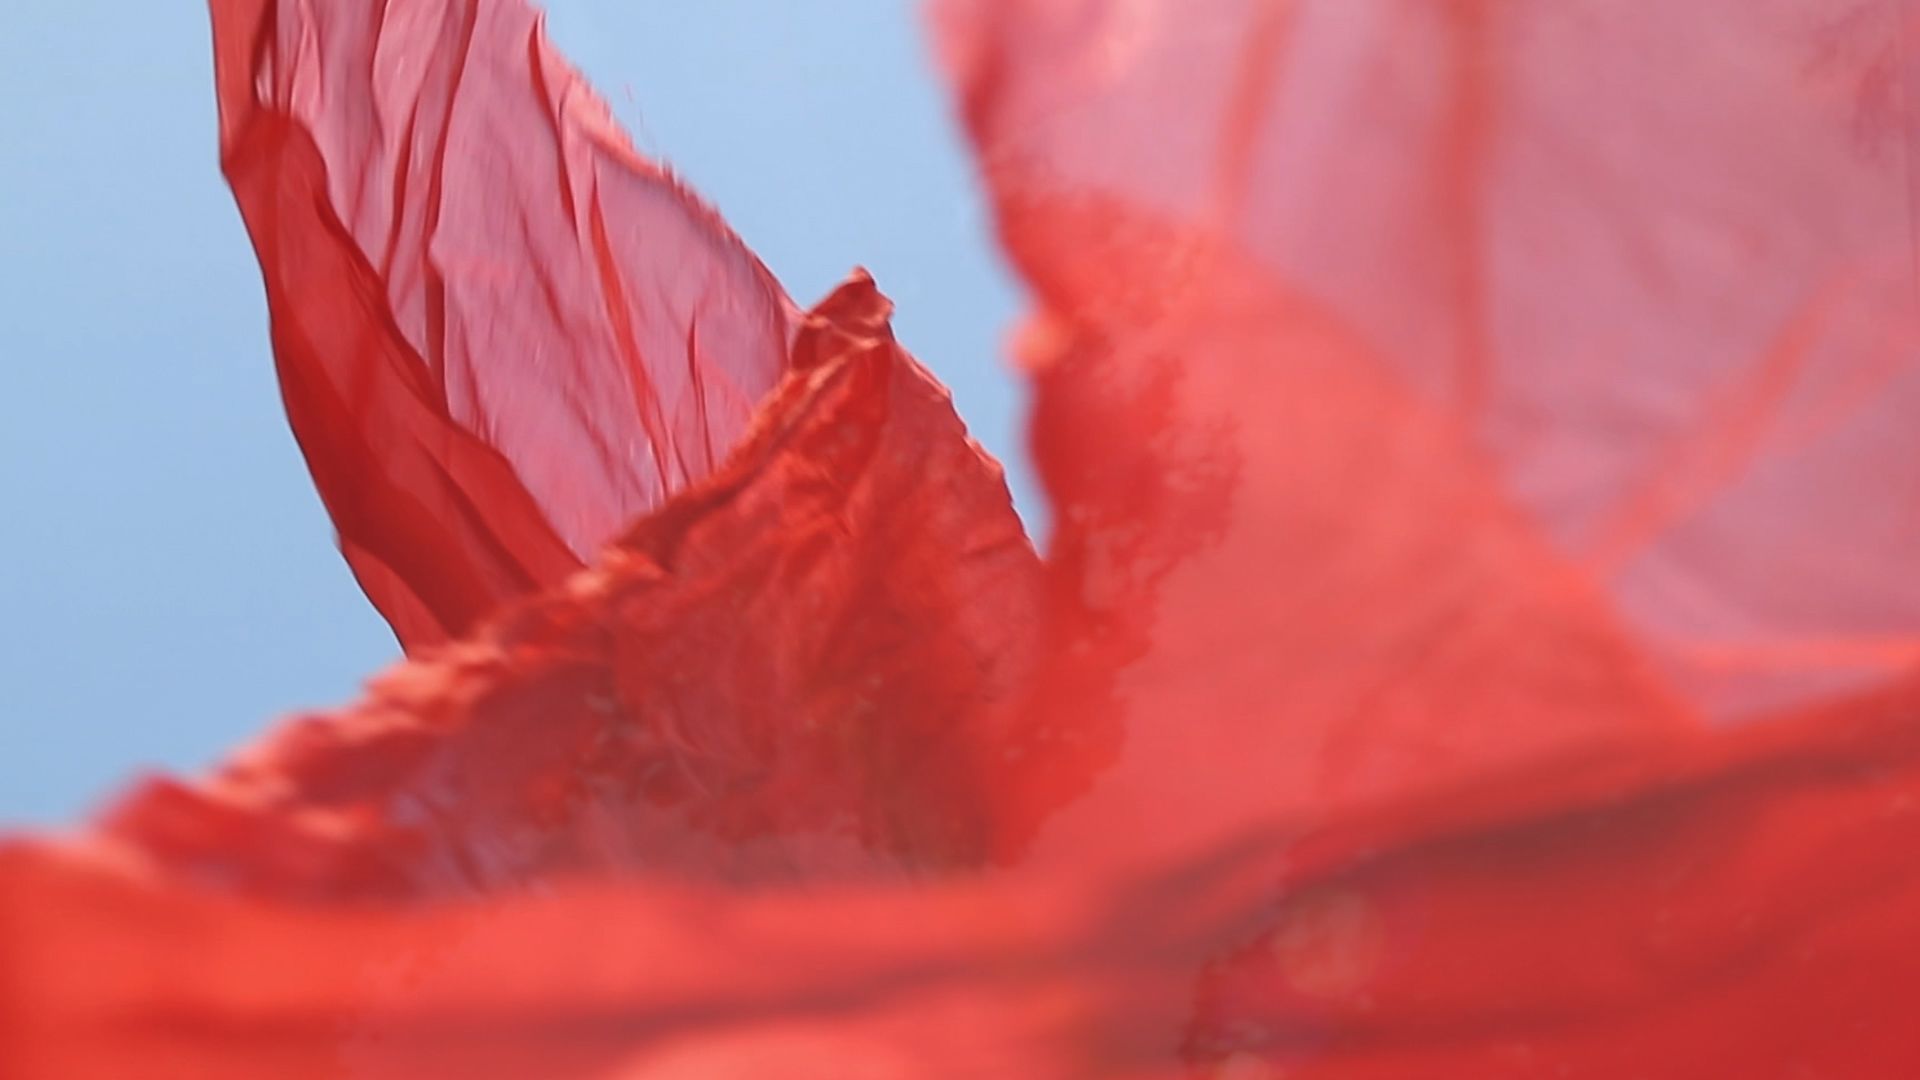 A red see through material floating against a blue sky